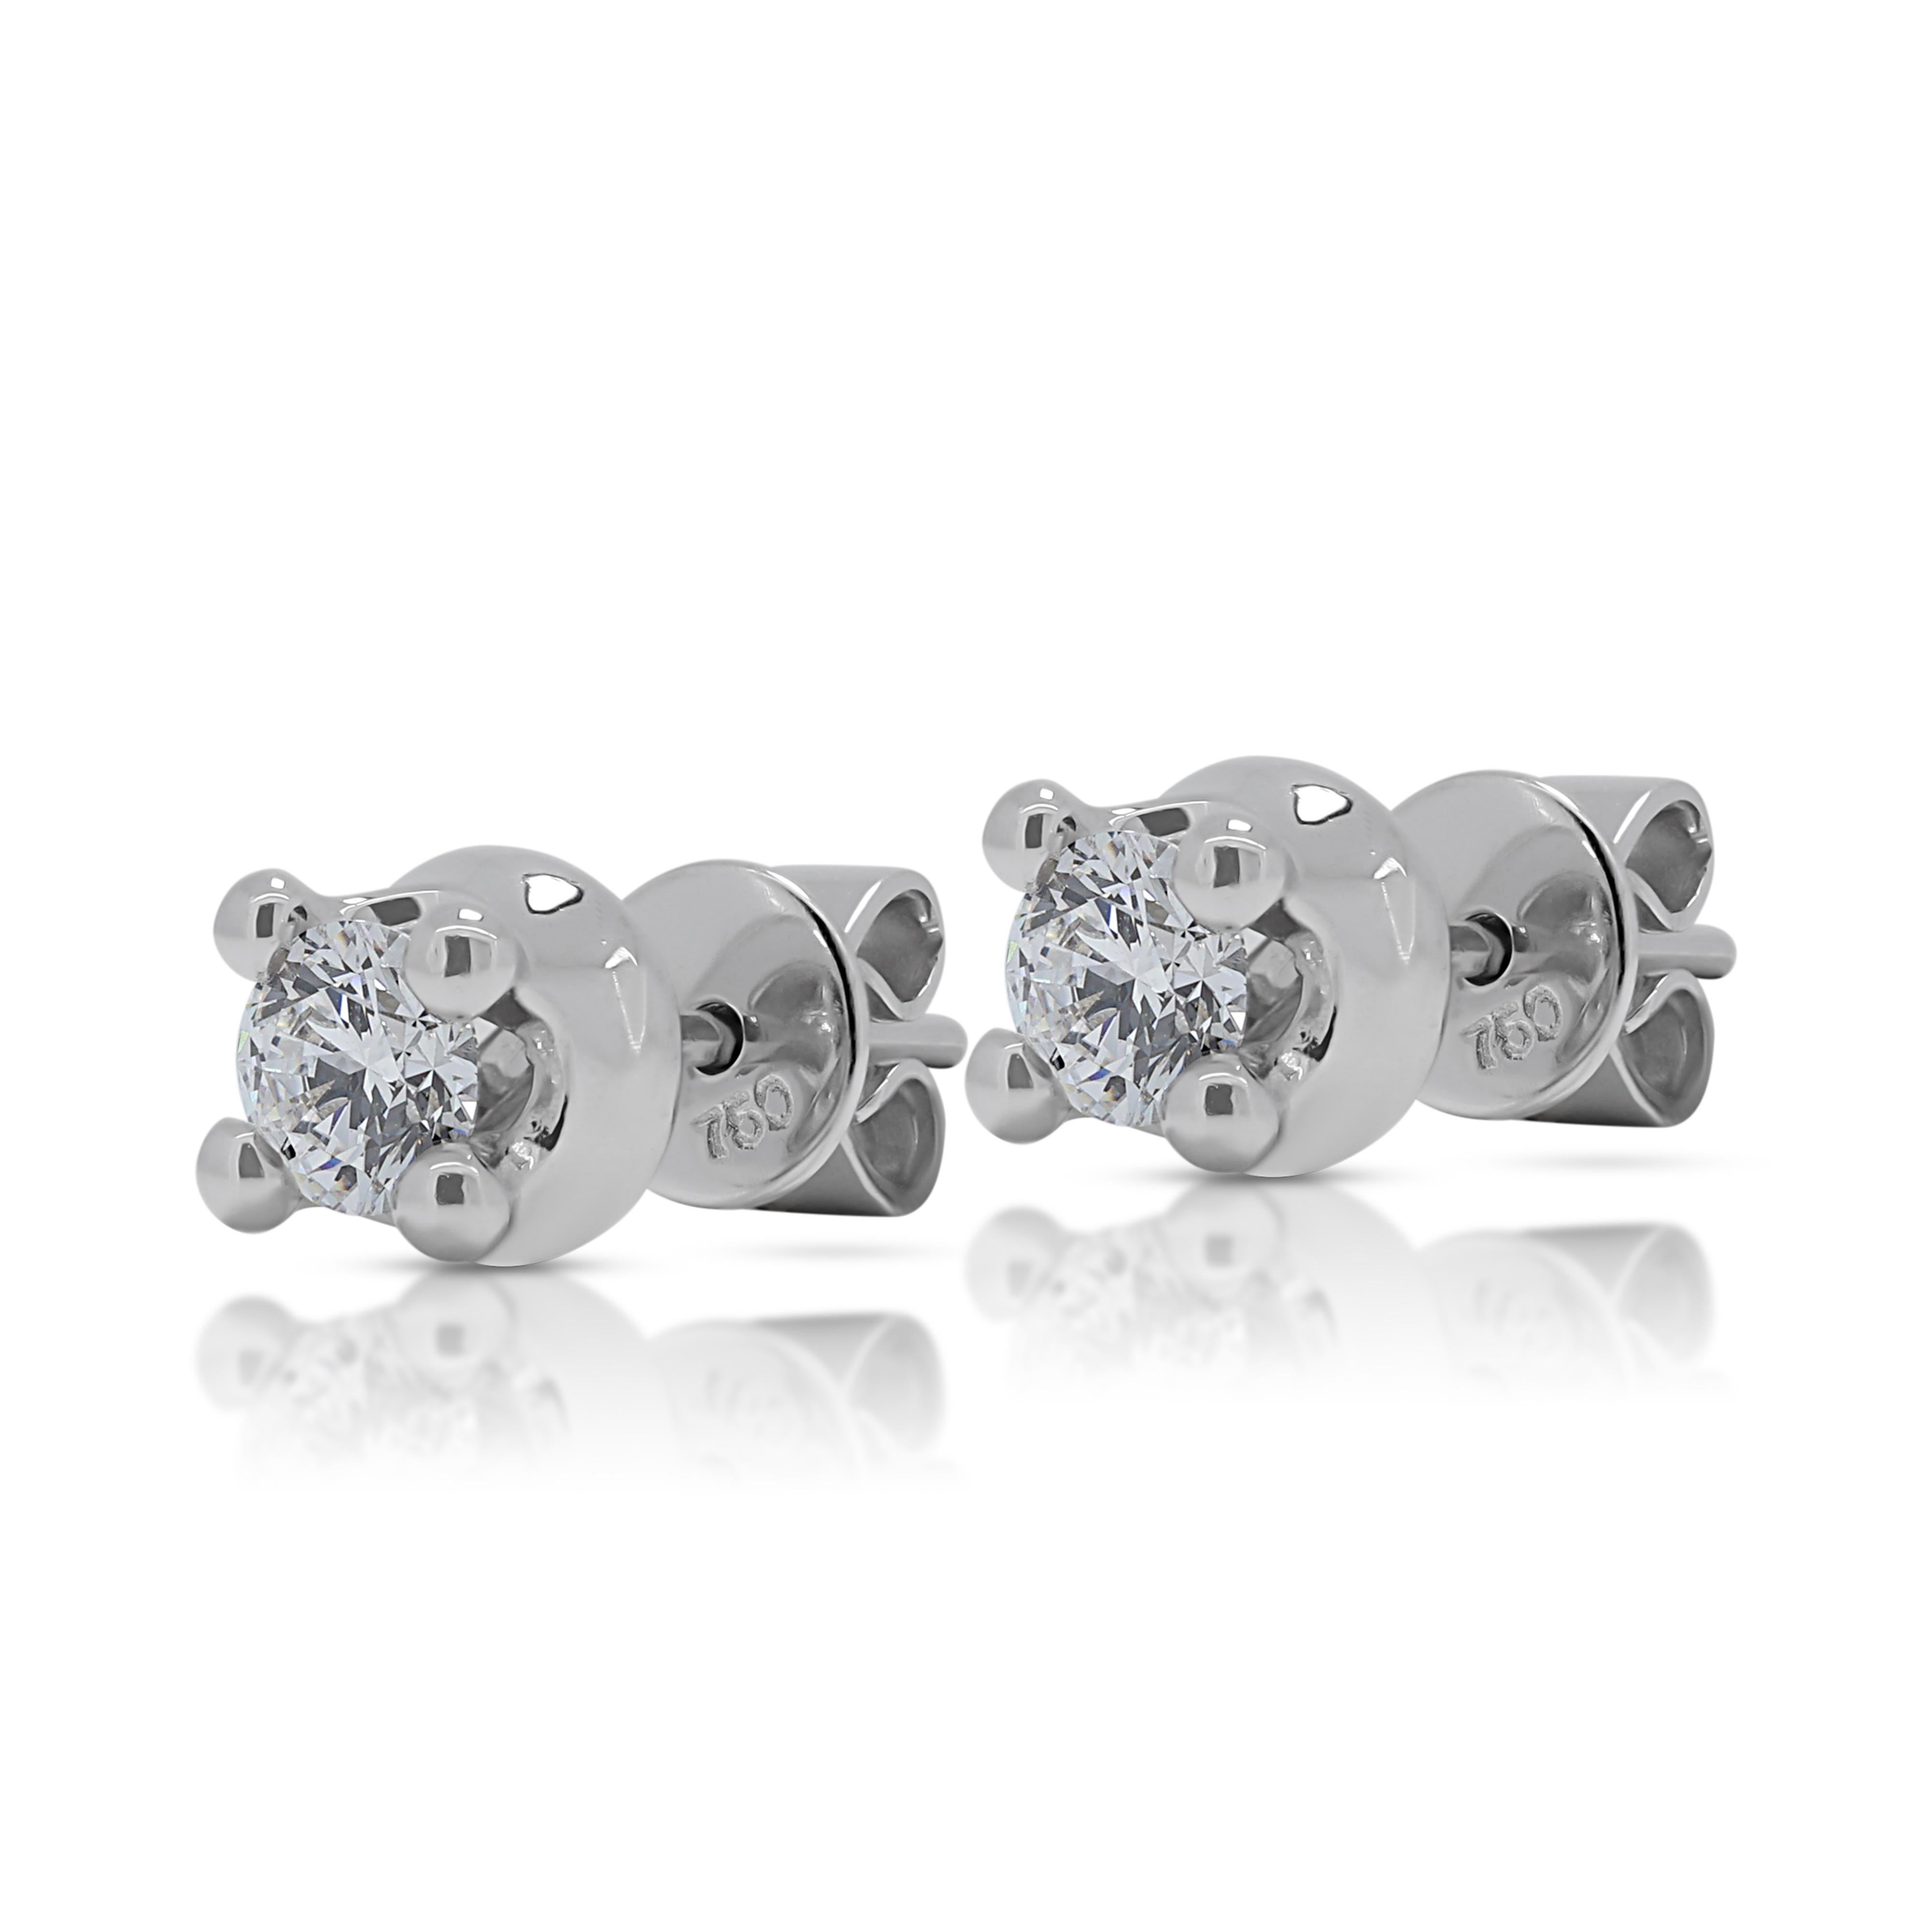 Classic 0.66ct Diamond Stud Earrings in 18K White Gold In Excellent Condition For Sale In רמת גן, IL